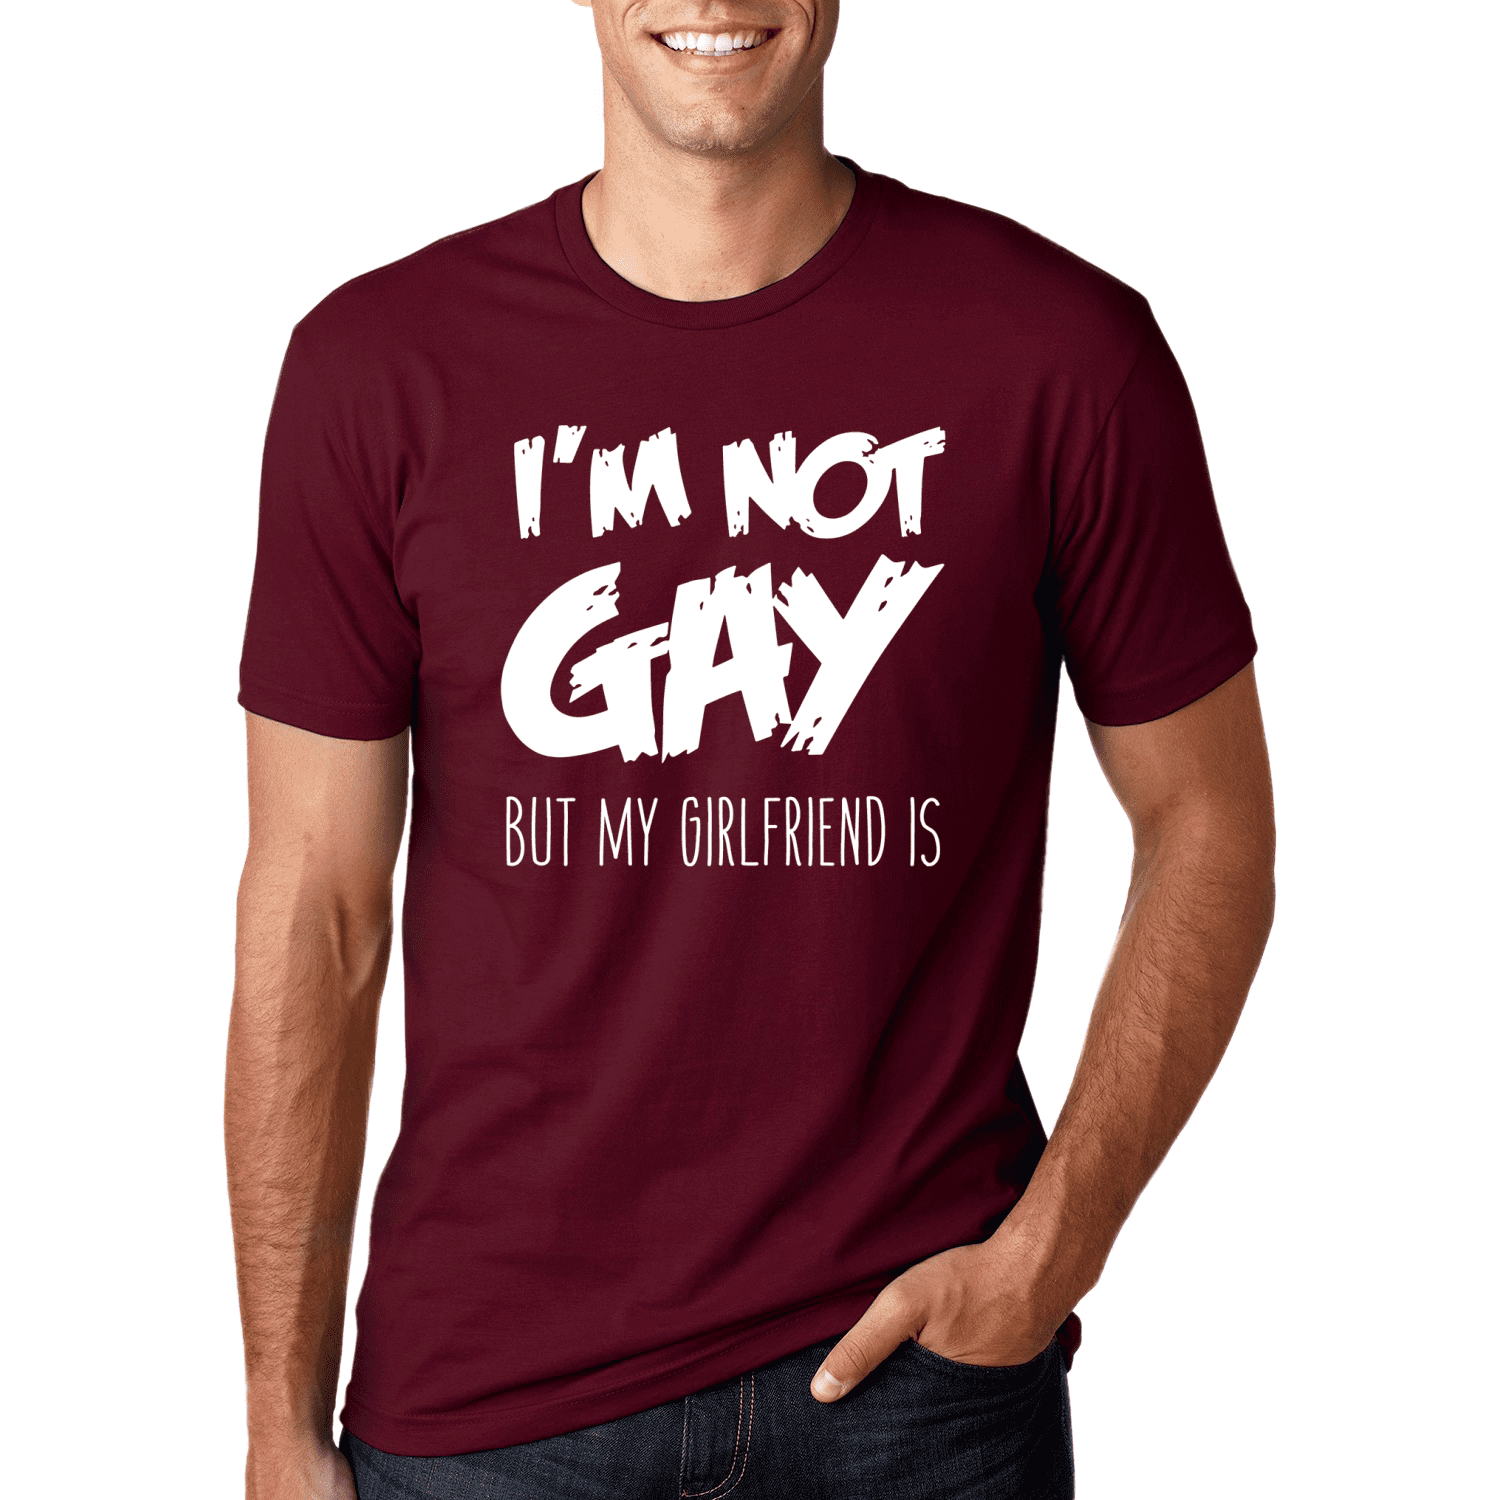 Not Every Gay Man Is Dtf